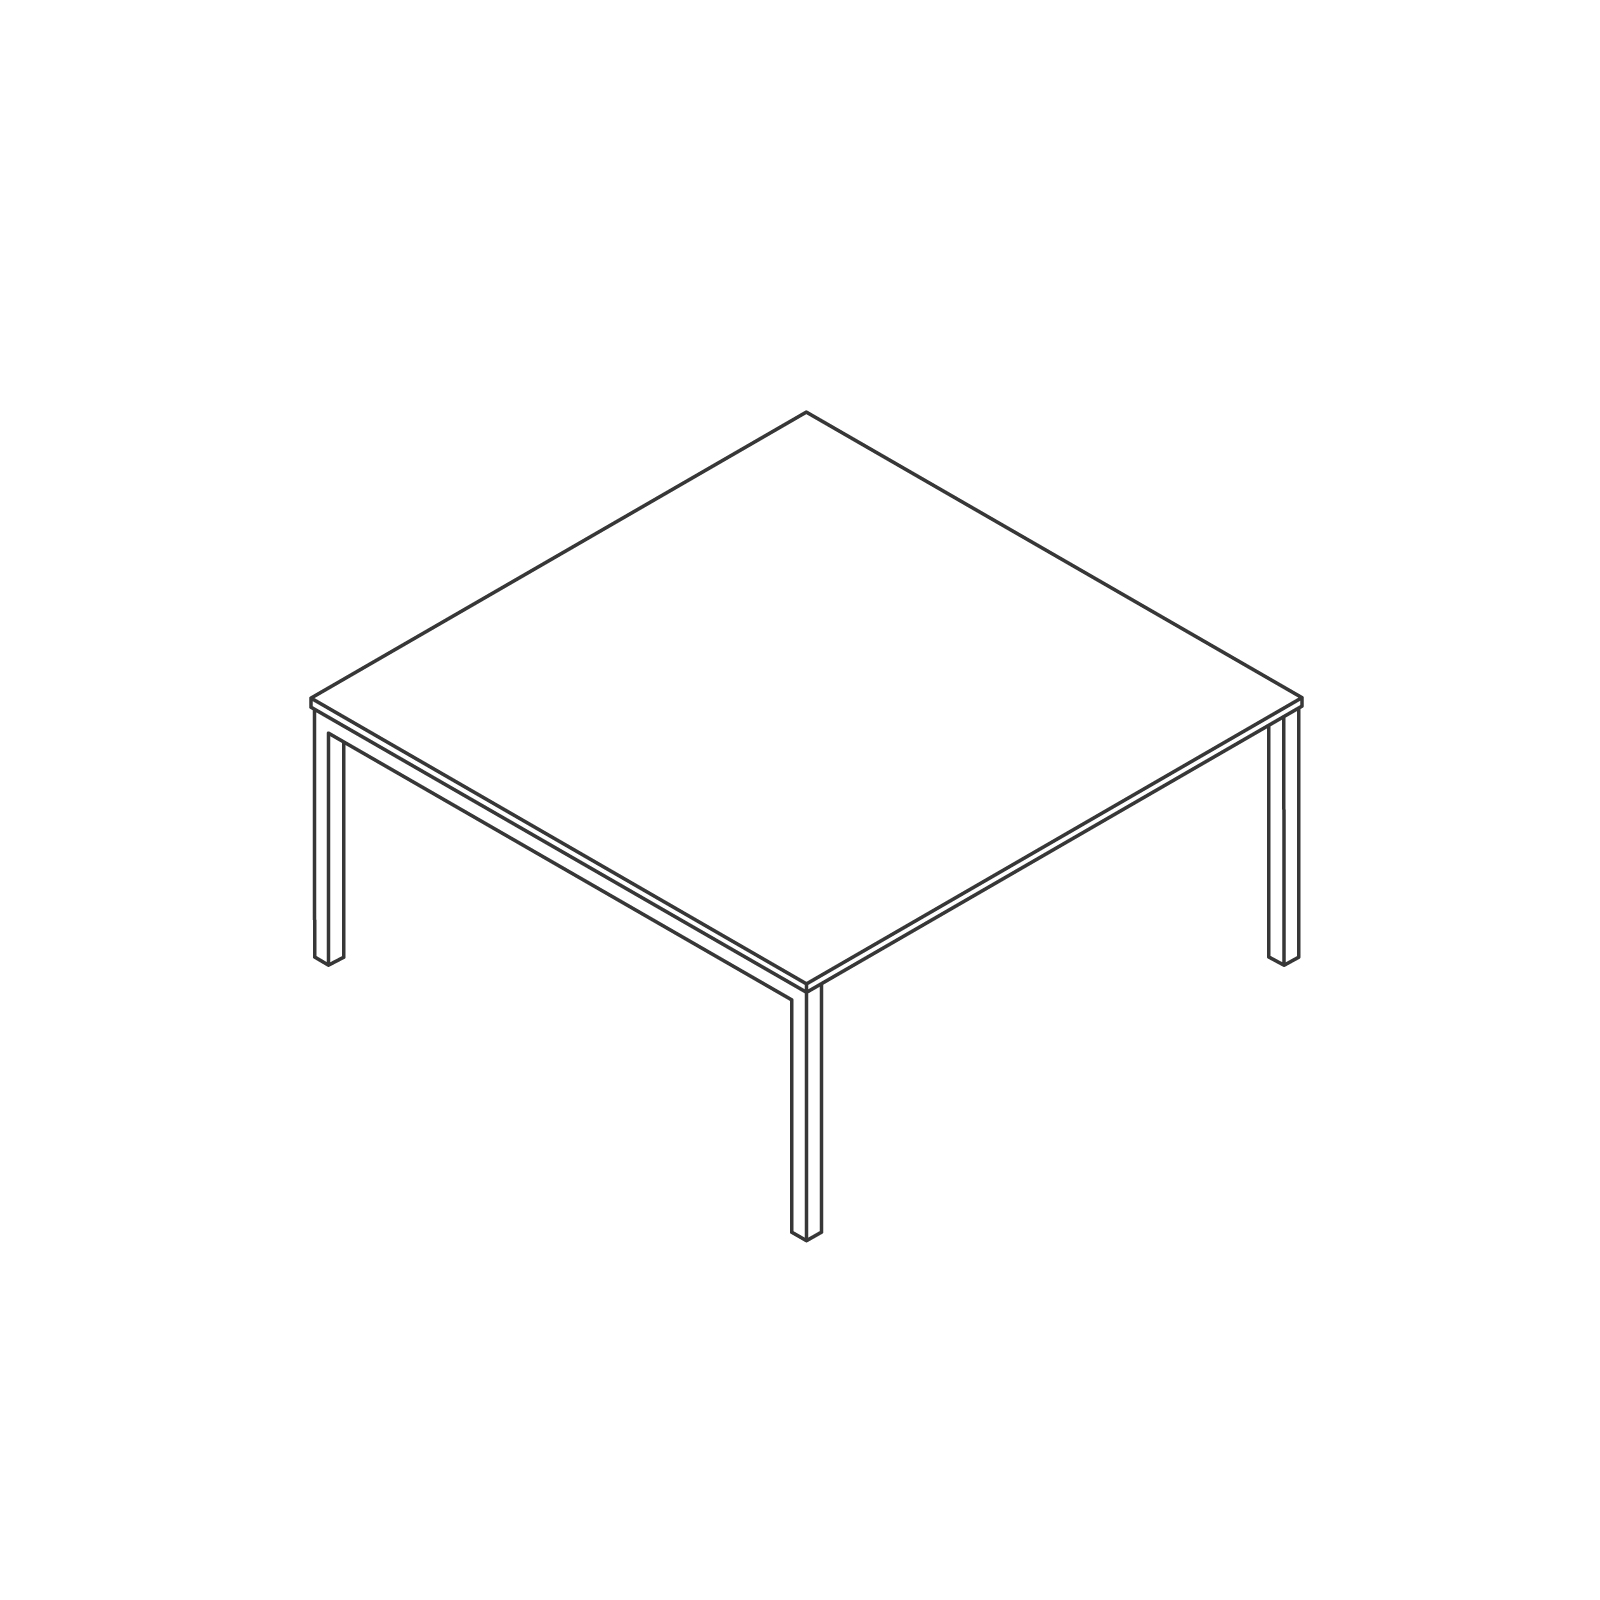 A line drawing - Layout Studio – Meeting Table – 4 Person